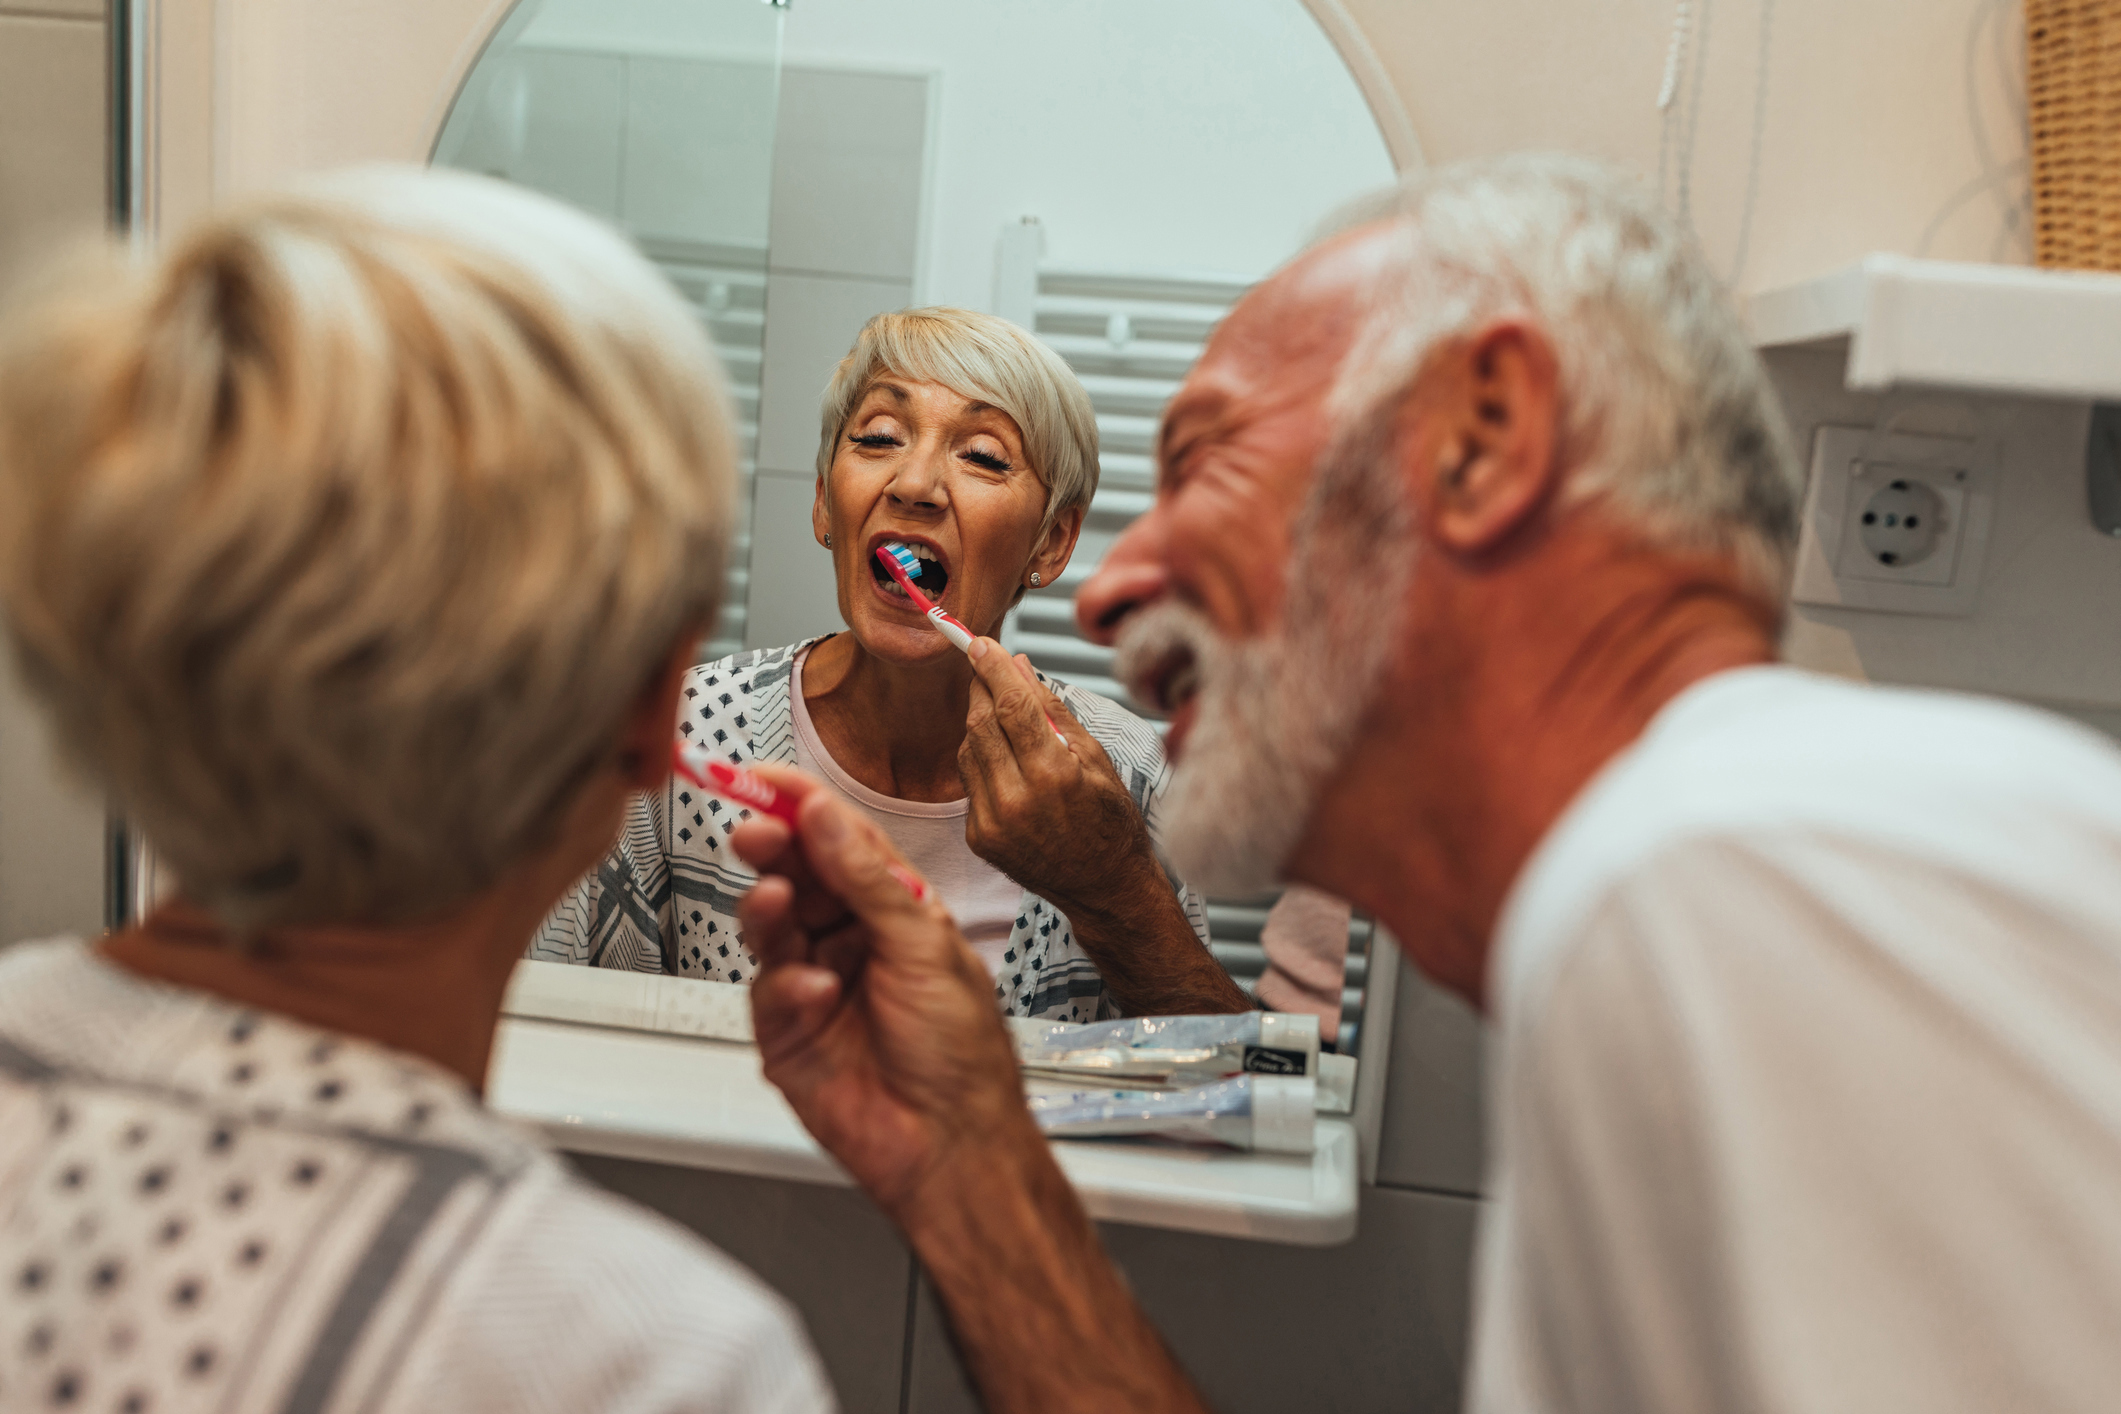 Oral Health Tips for Caregivers | NIH News in Health